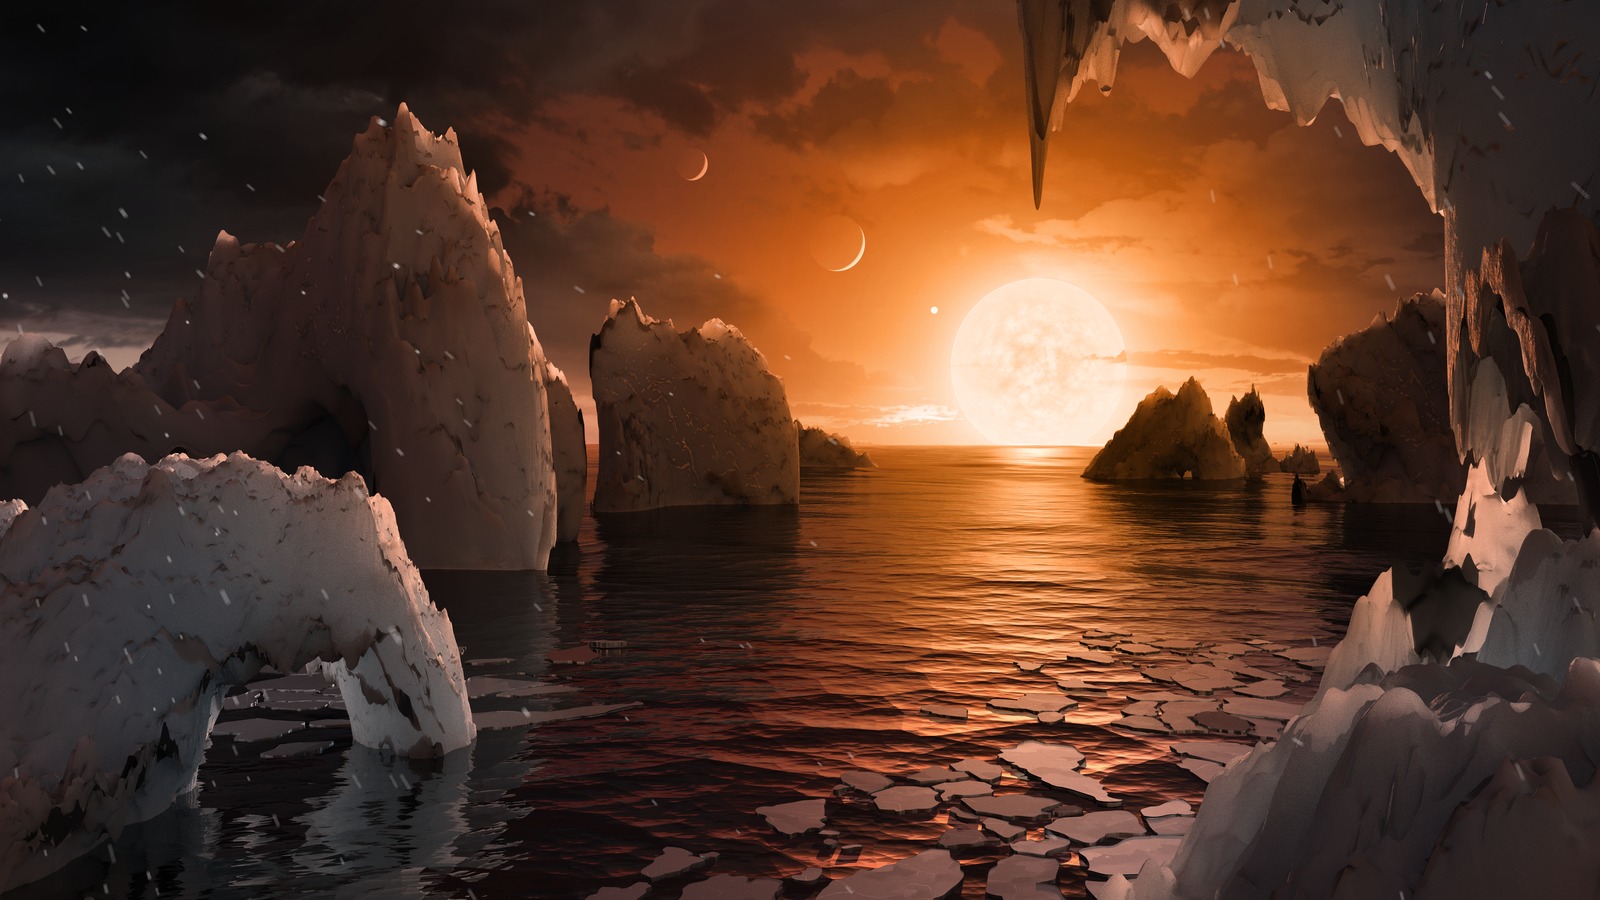 Artist's concept of the surface of an exoplanet TRAPPIST-1f.  In this image you can see many rock formations in the sea as the glowing sun sets in the distance.